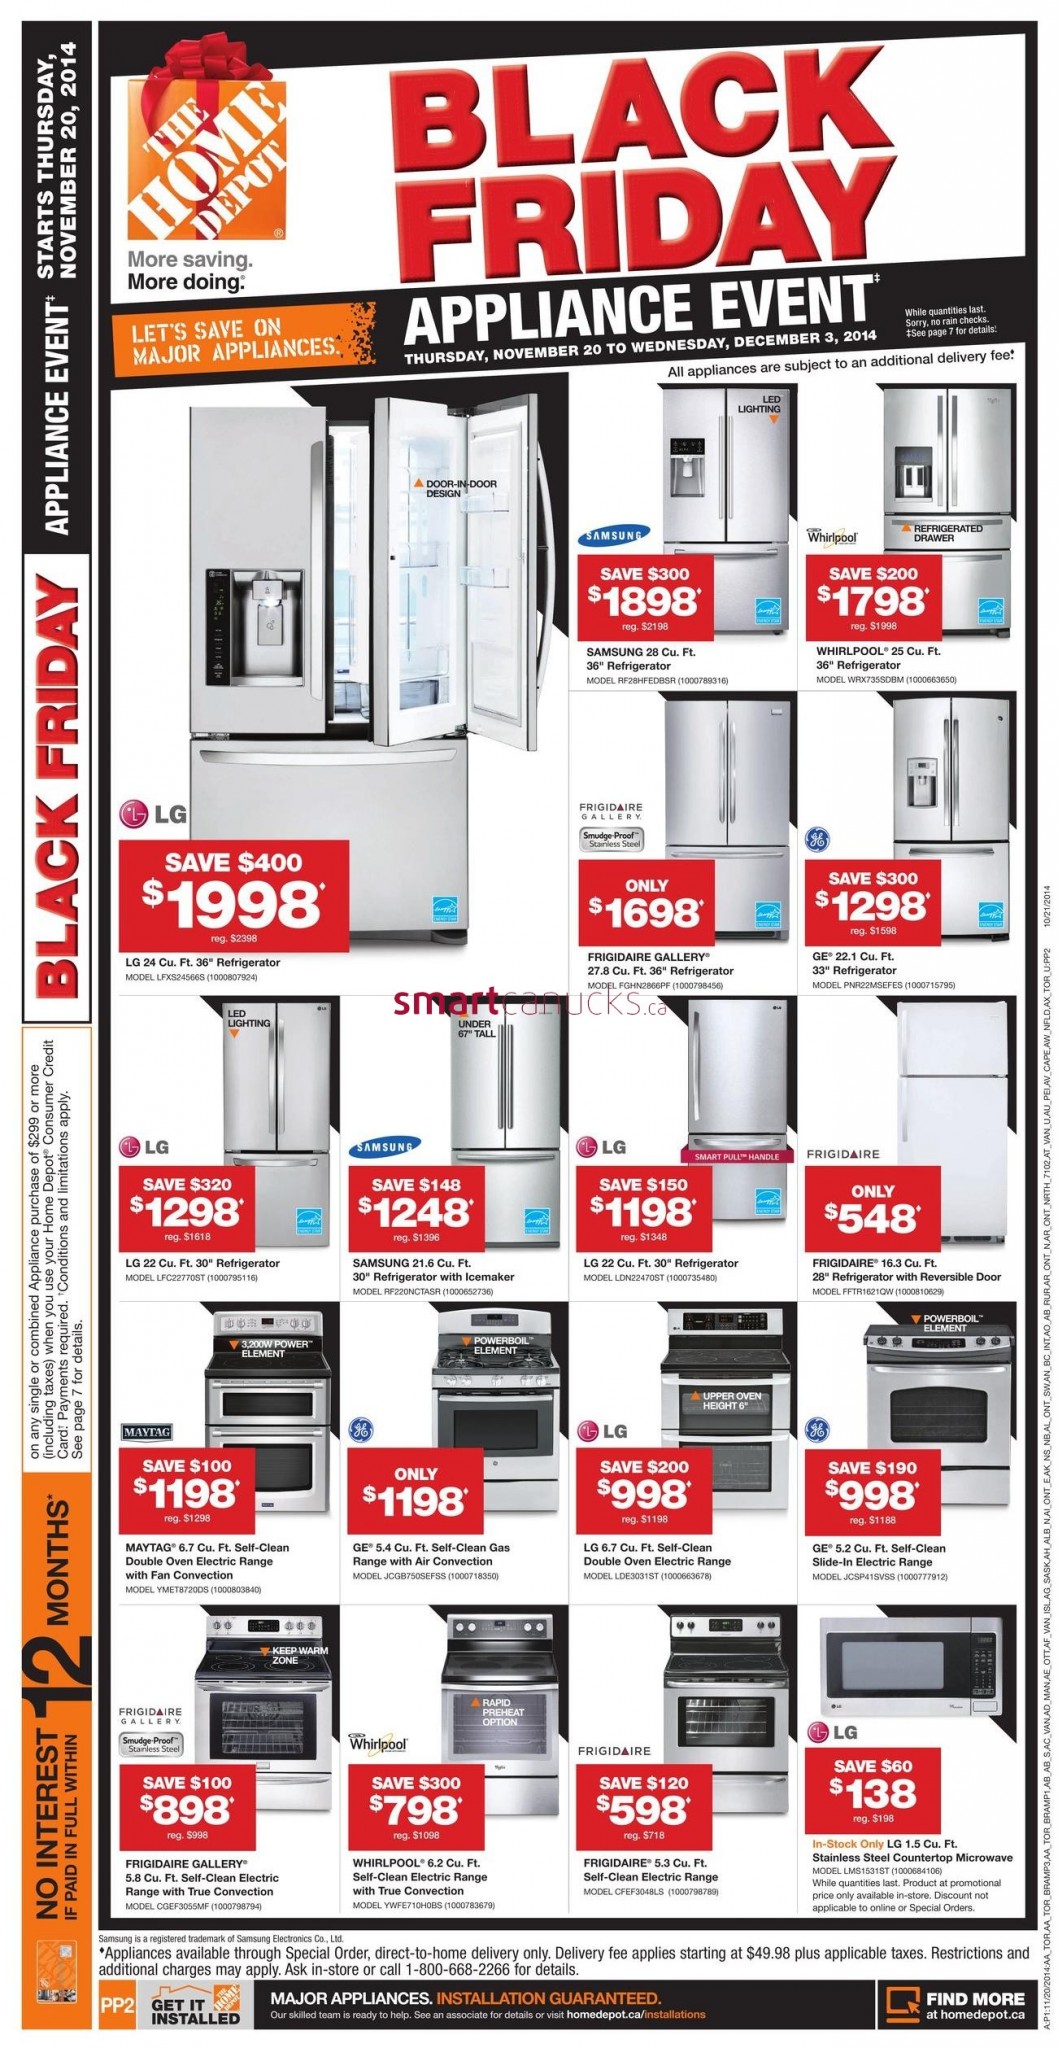 Home Depot Black Friday Canada 2014 Flyer, Sales and Deals › Black Friday Canada